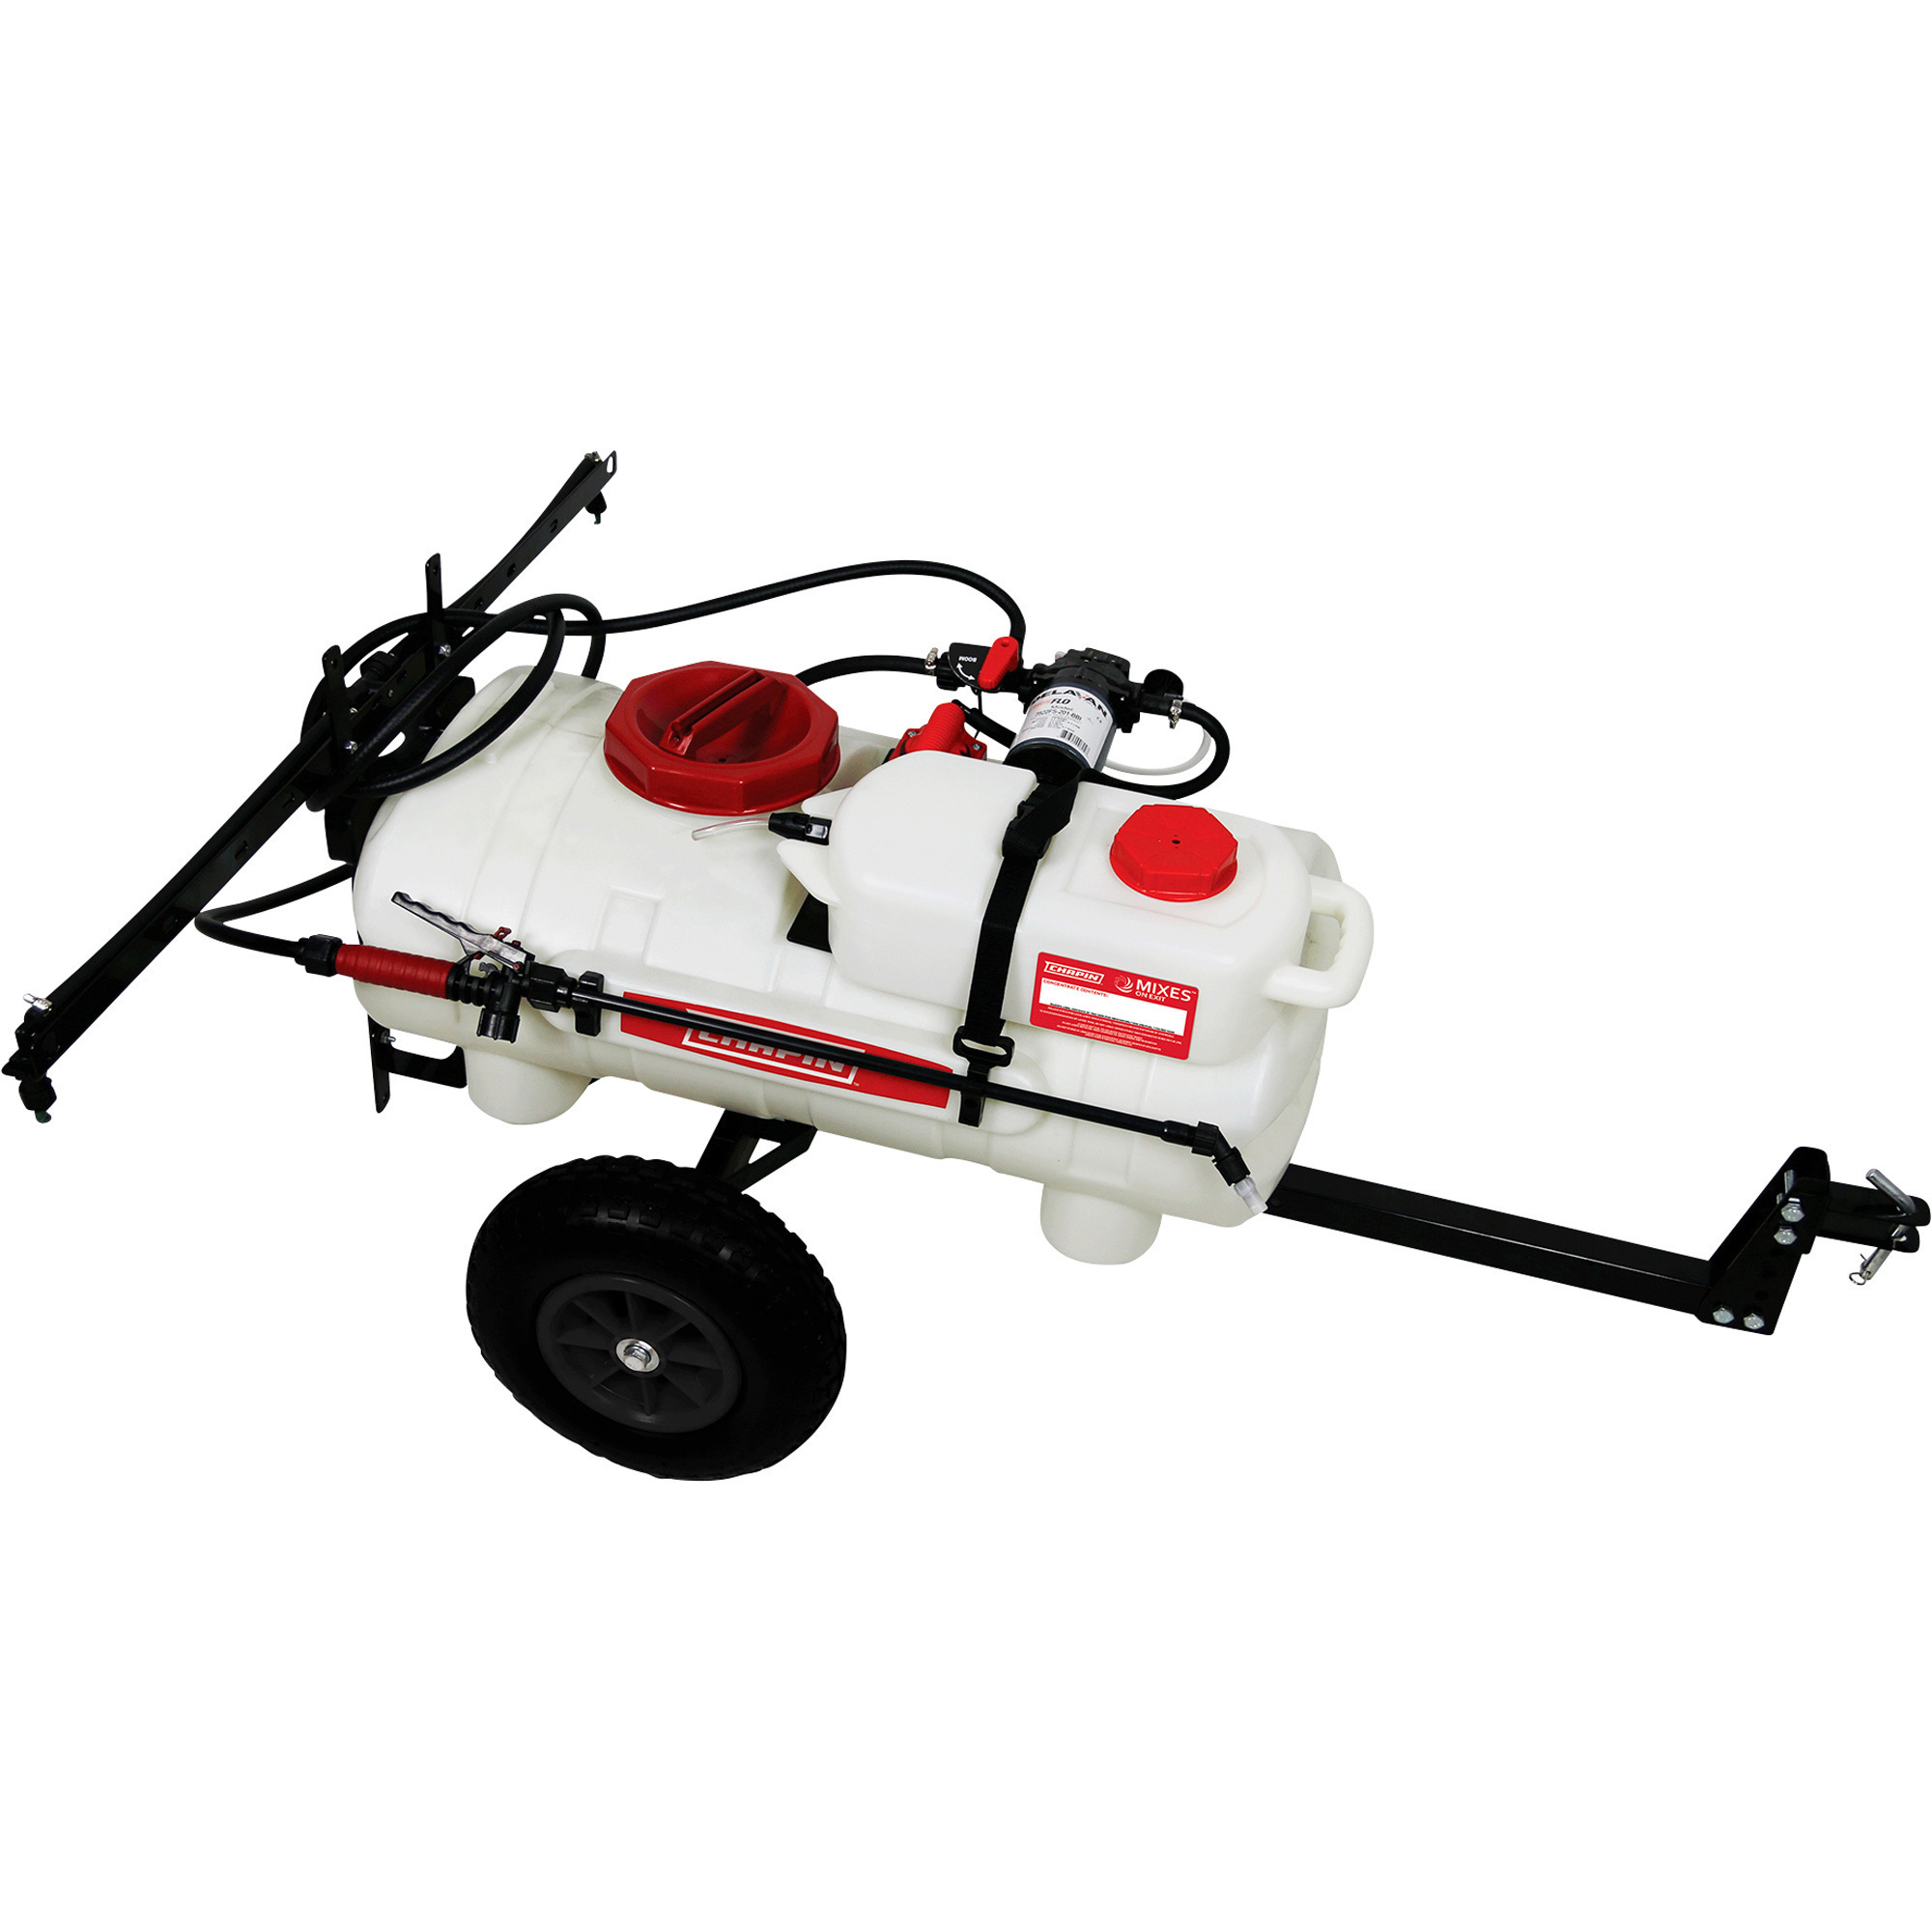 Chapin Mixes On Exit Tow-Behind Sprayer System, 25-Gal. Capacity, Model 97761